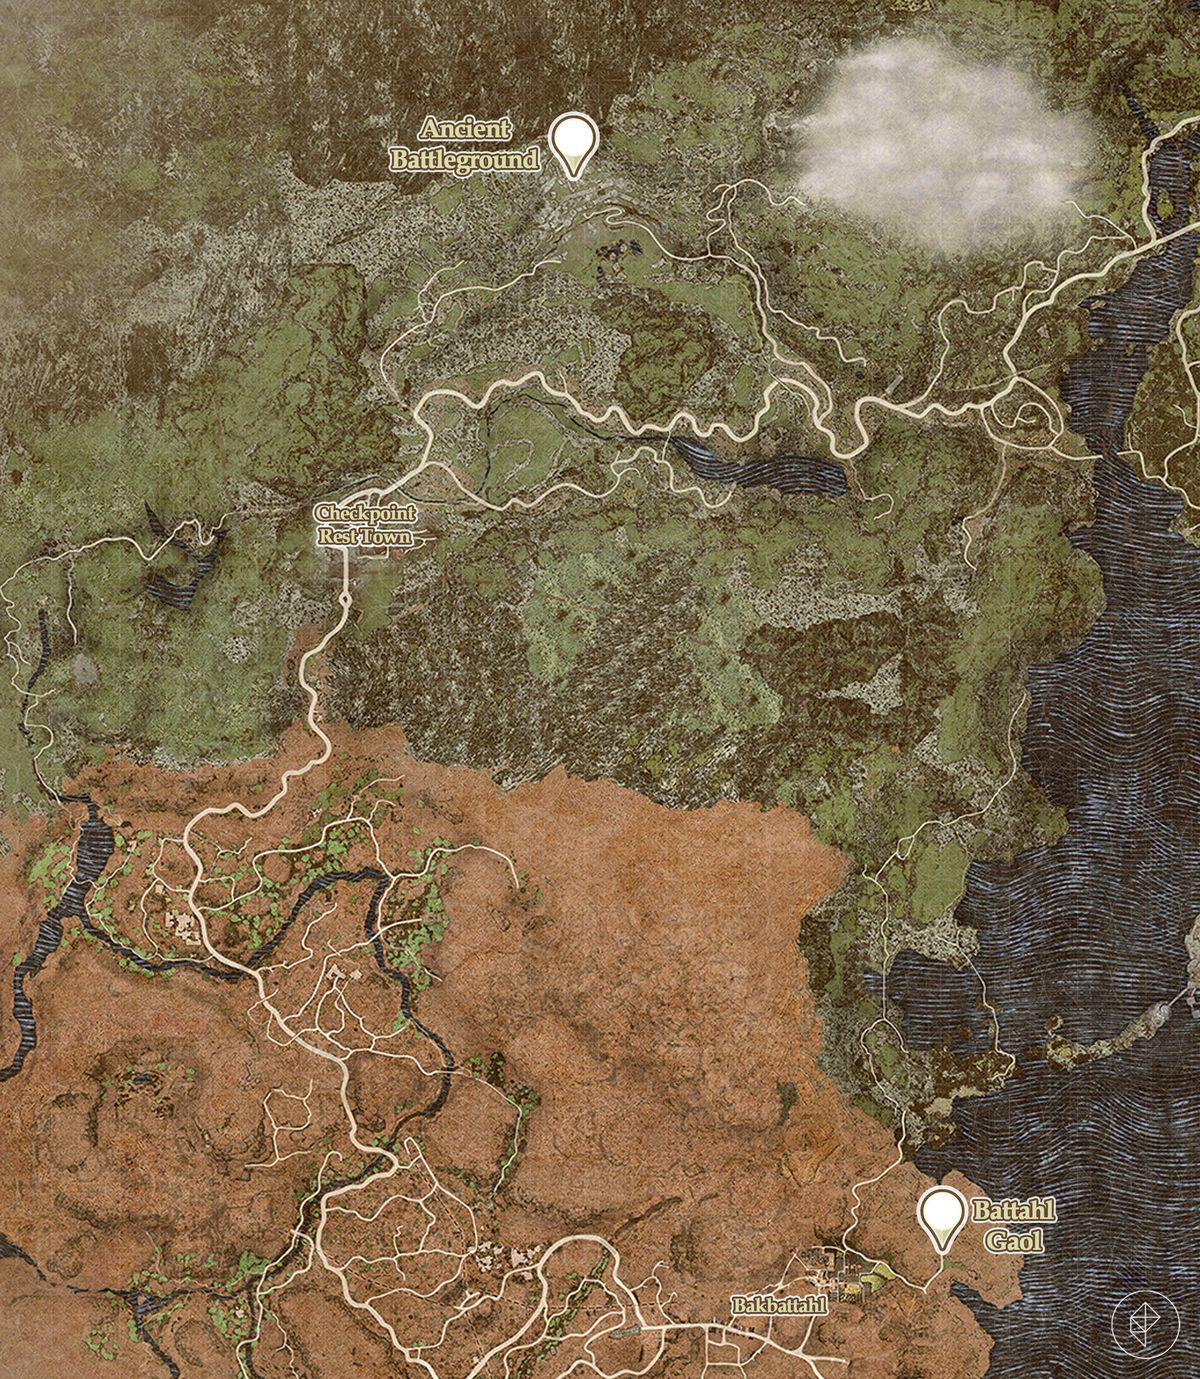 Dragon’s Dogma 2 map showing the locations of the Battahl Gaol and the Ancient Battleground